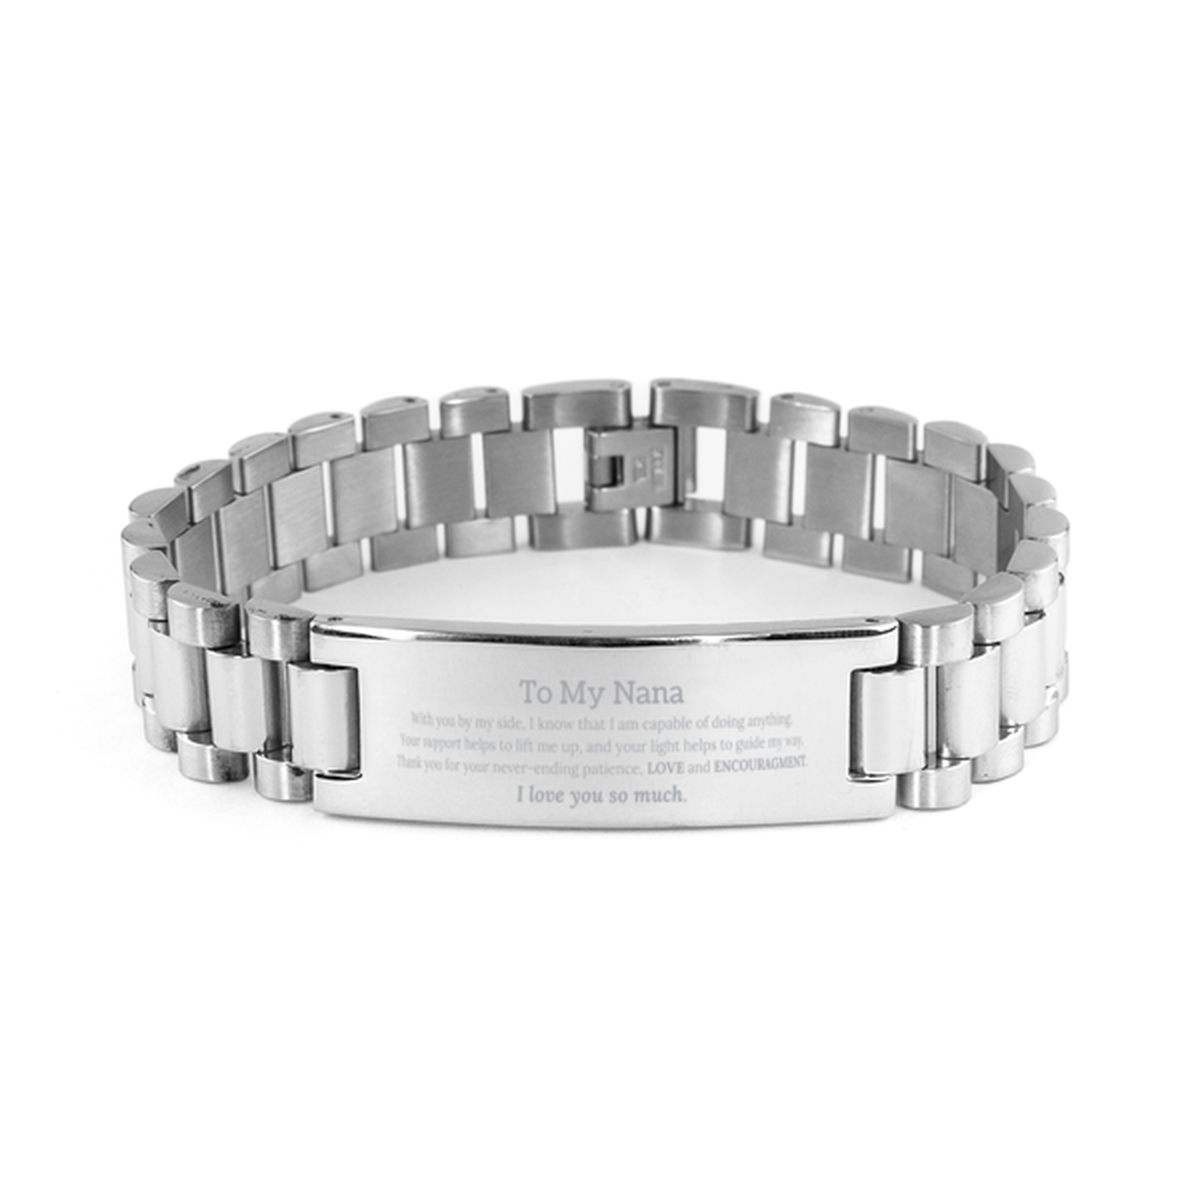 Appreciation Nana Ladder Stainless Steel Bracelet Gifts, To My Nana Birthday Christmas Wedding Keepsake Gifts for Nana With you by my side, I know that I am capable of doing anything. I love you so much